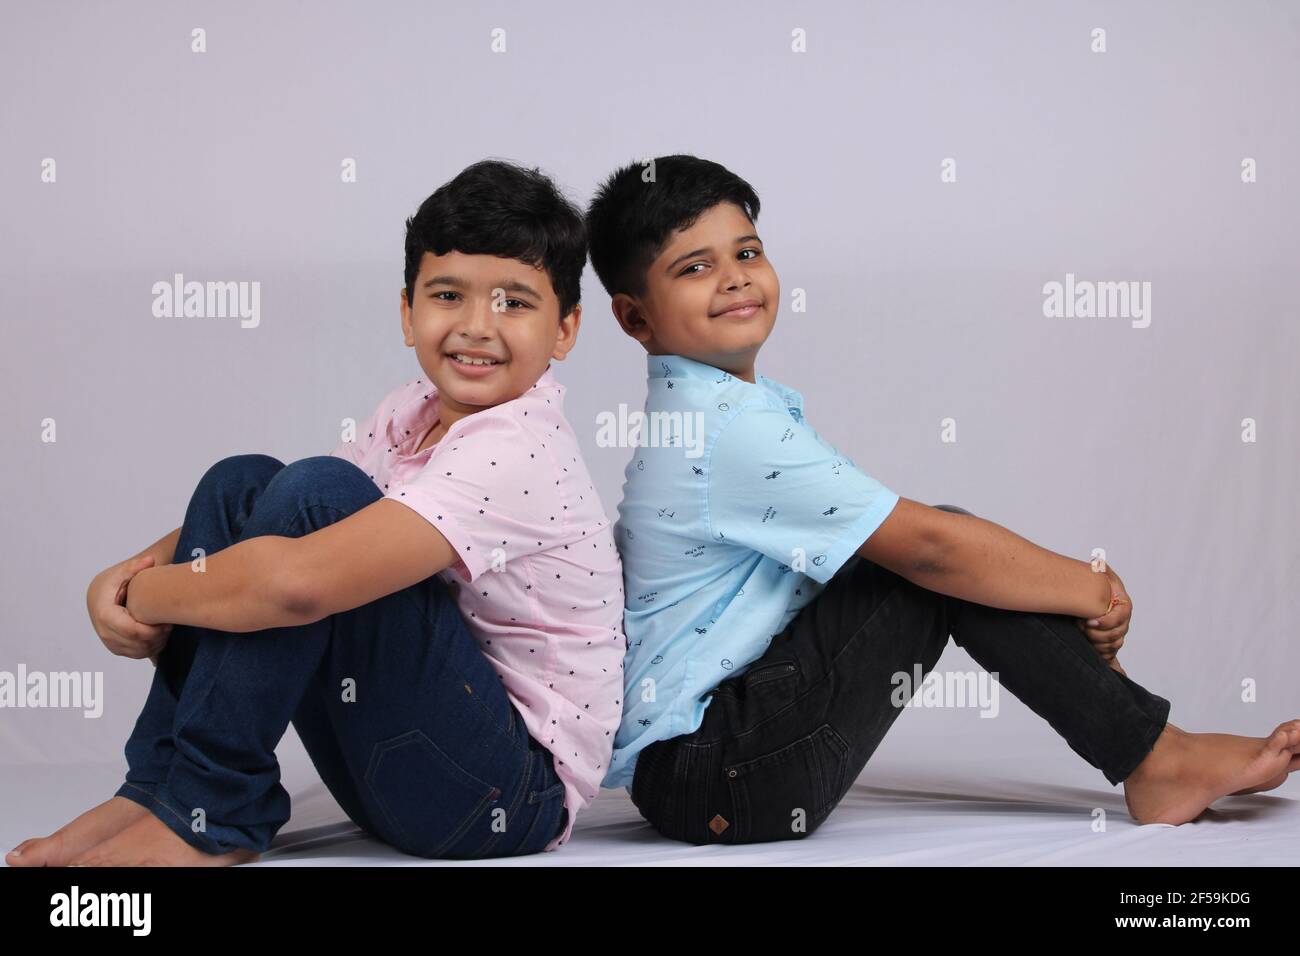 cheerful indian siblings hugging and posing for a photo. Stock Photo